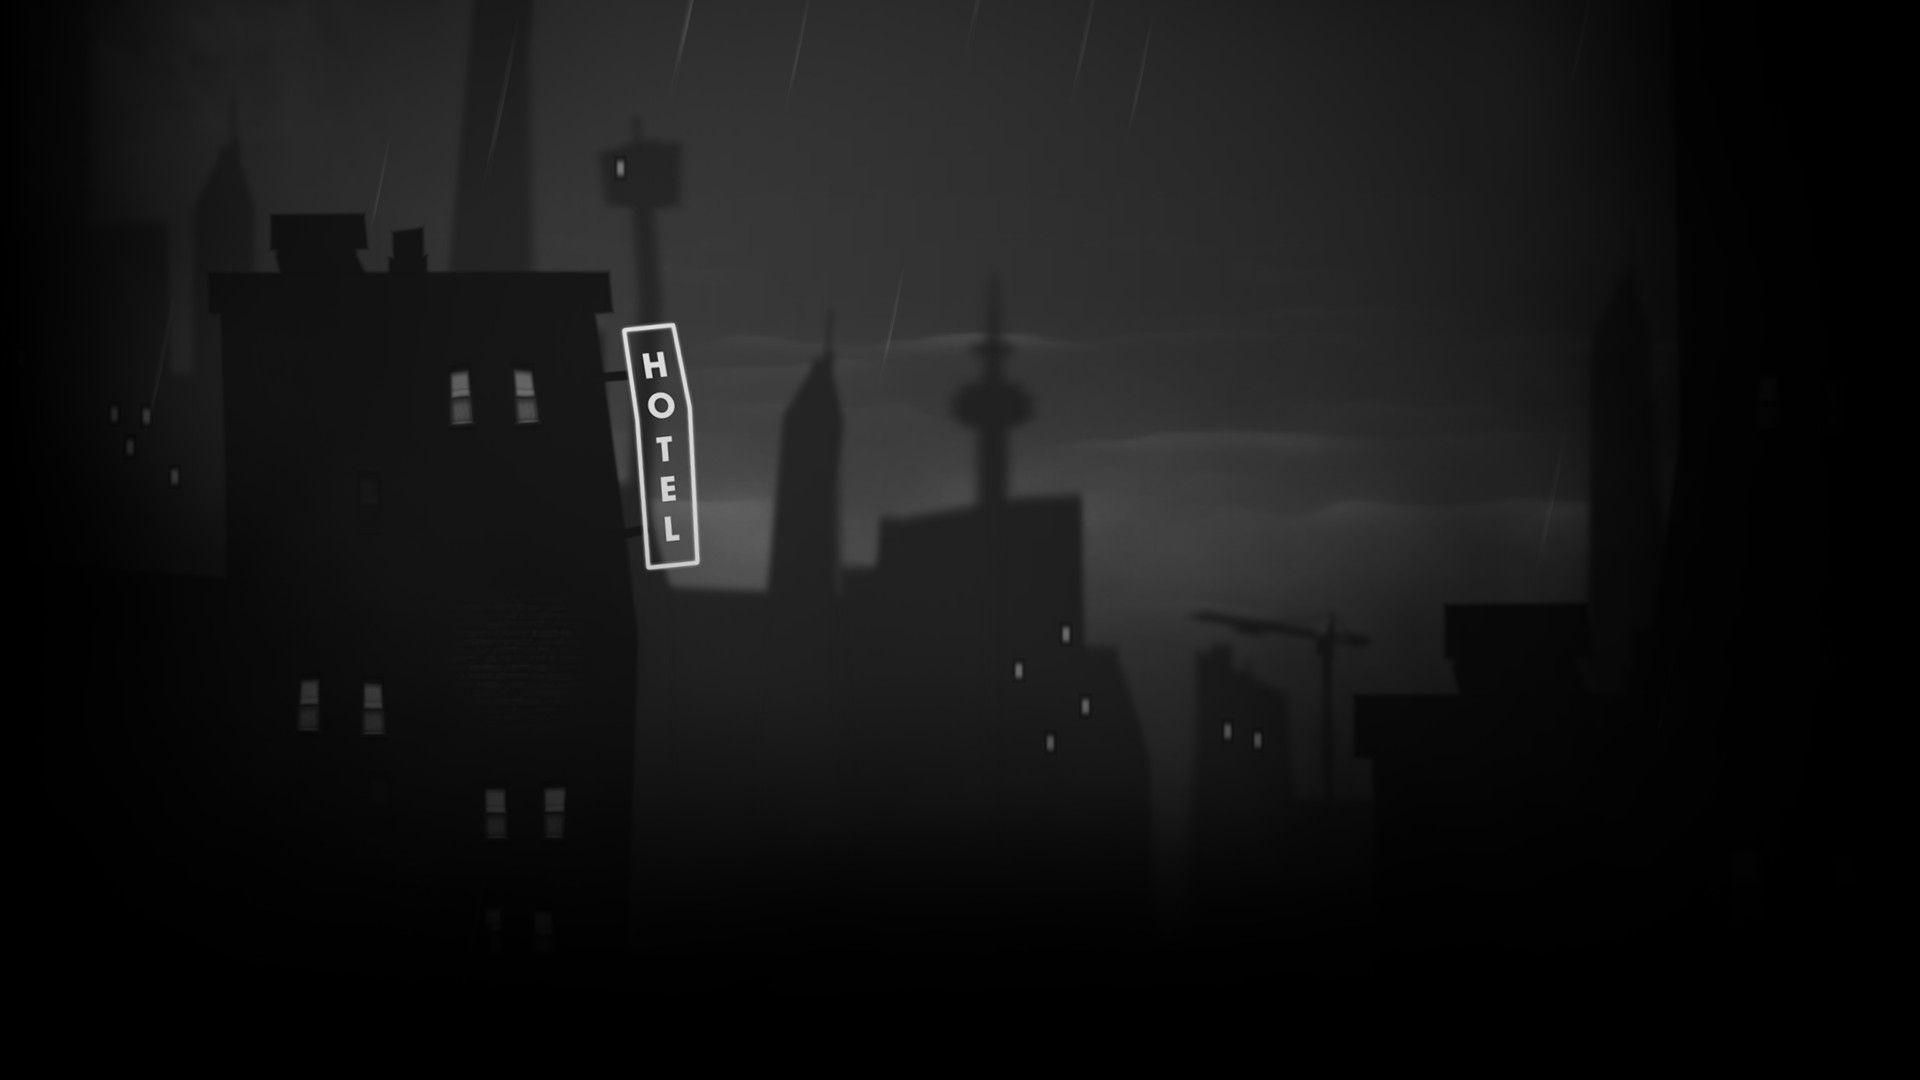 A dark city with buildings and street lights - 1920x1080, HD, night